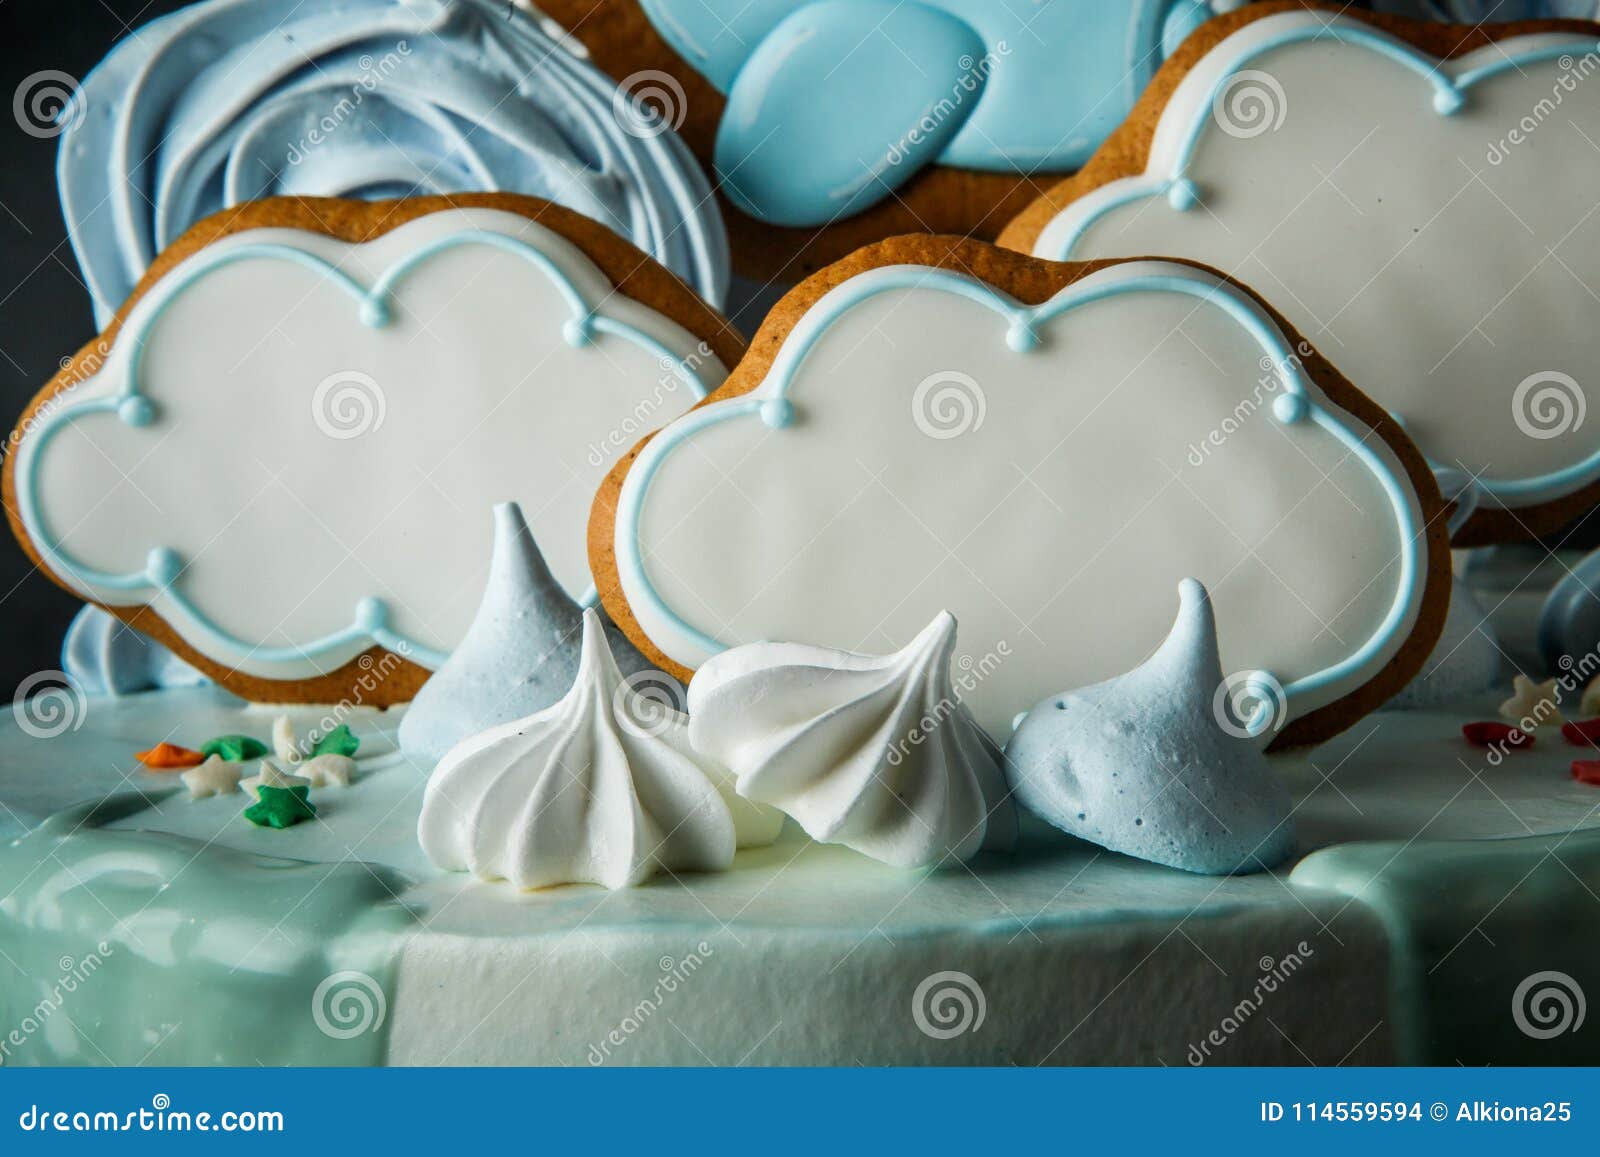 Discover more than 79 cloud theme cake latest - in.daotaonec